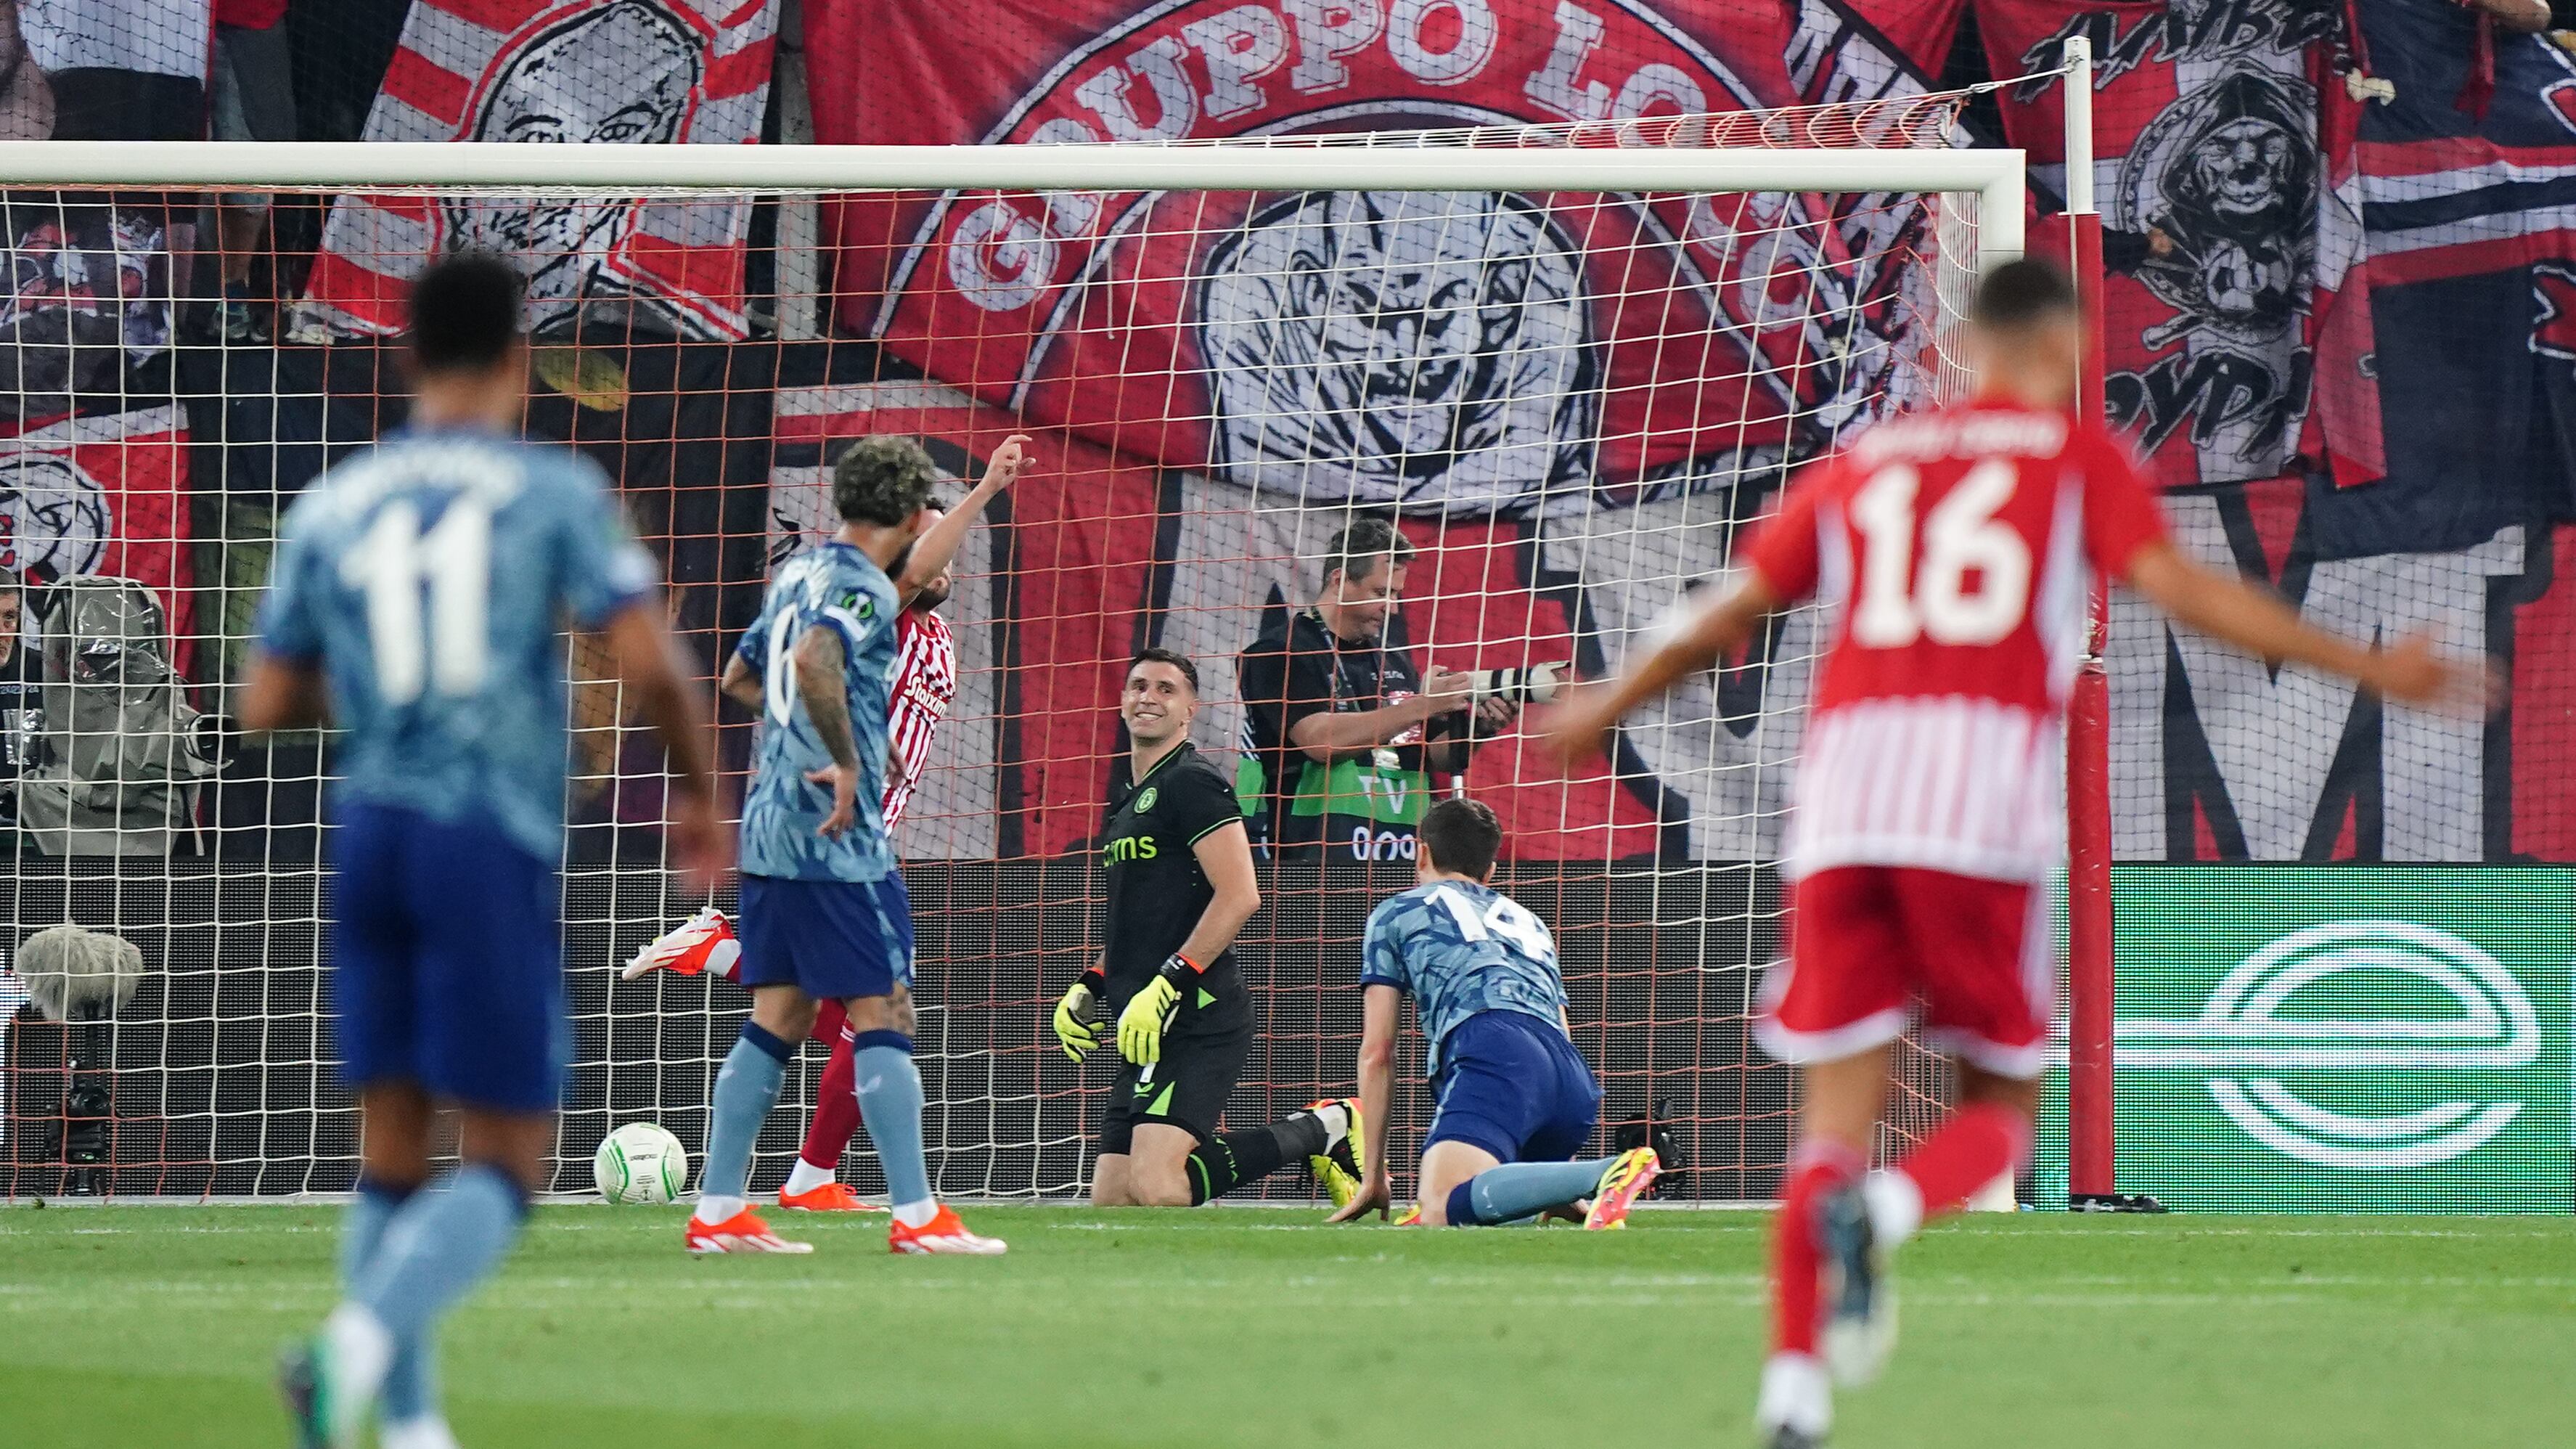 Aston Villa’s European dream is over after a losing to Olympiacos in the Europa Conference League semi-final